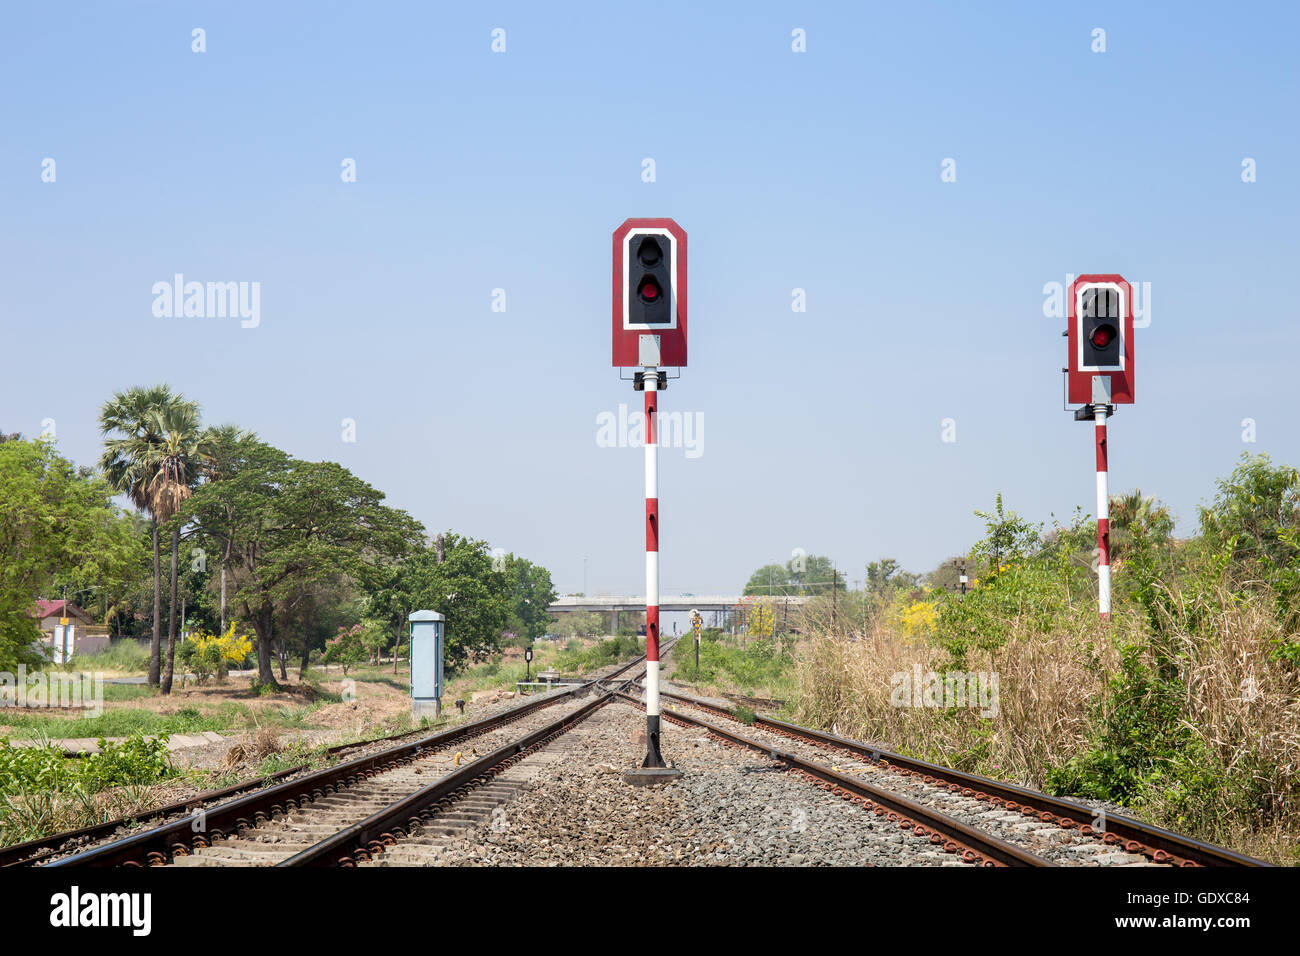 Train signals for railway and and traffic light for locomotive Stock Photo